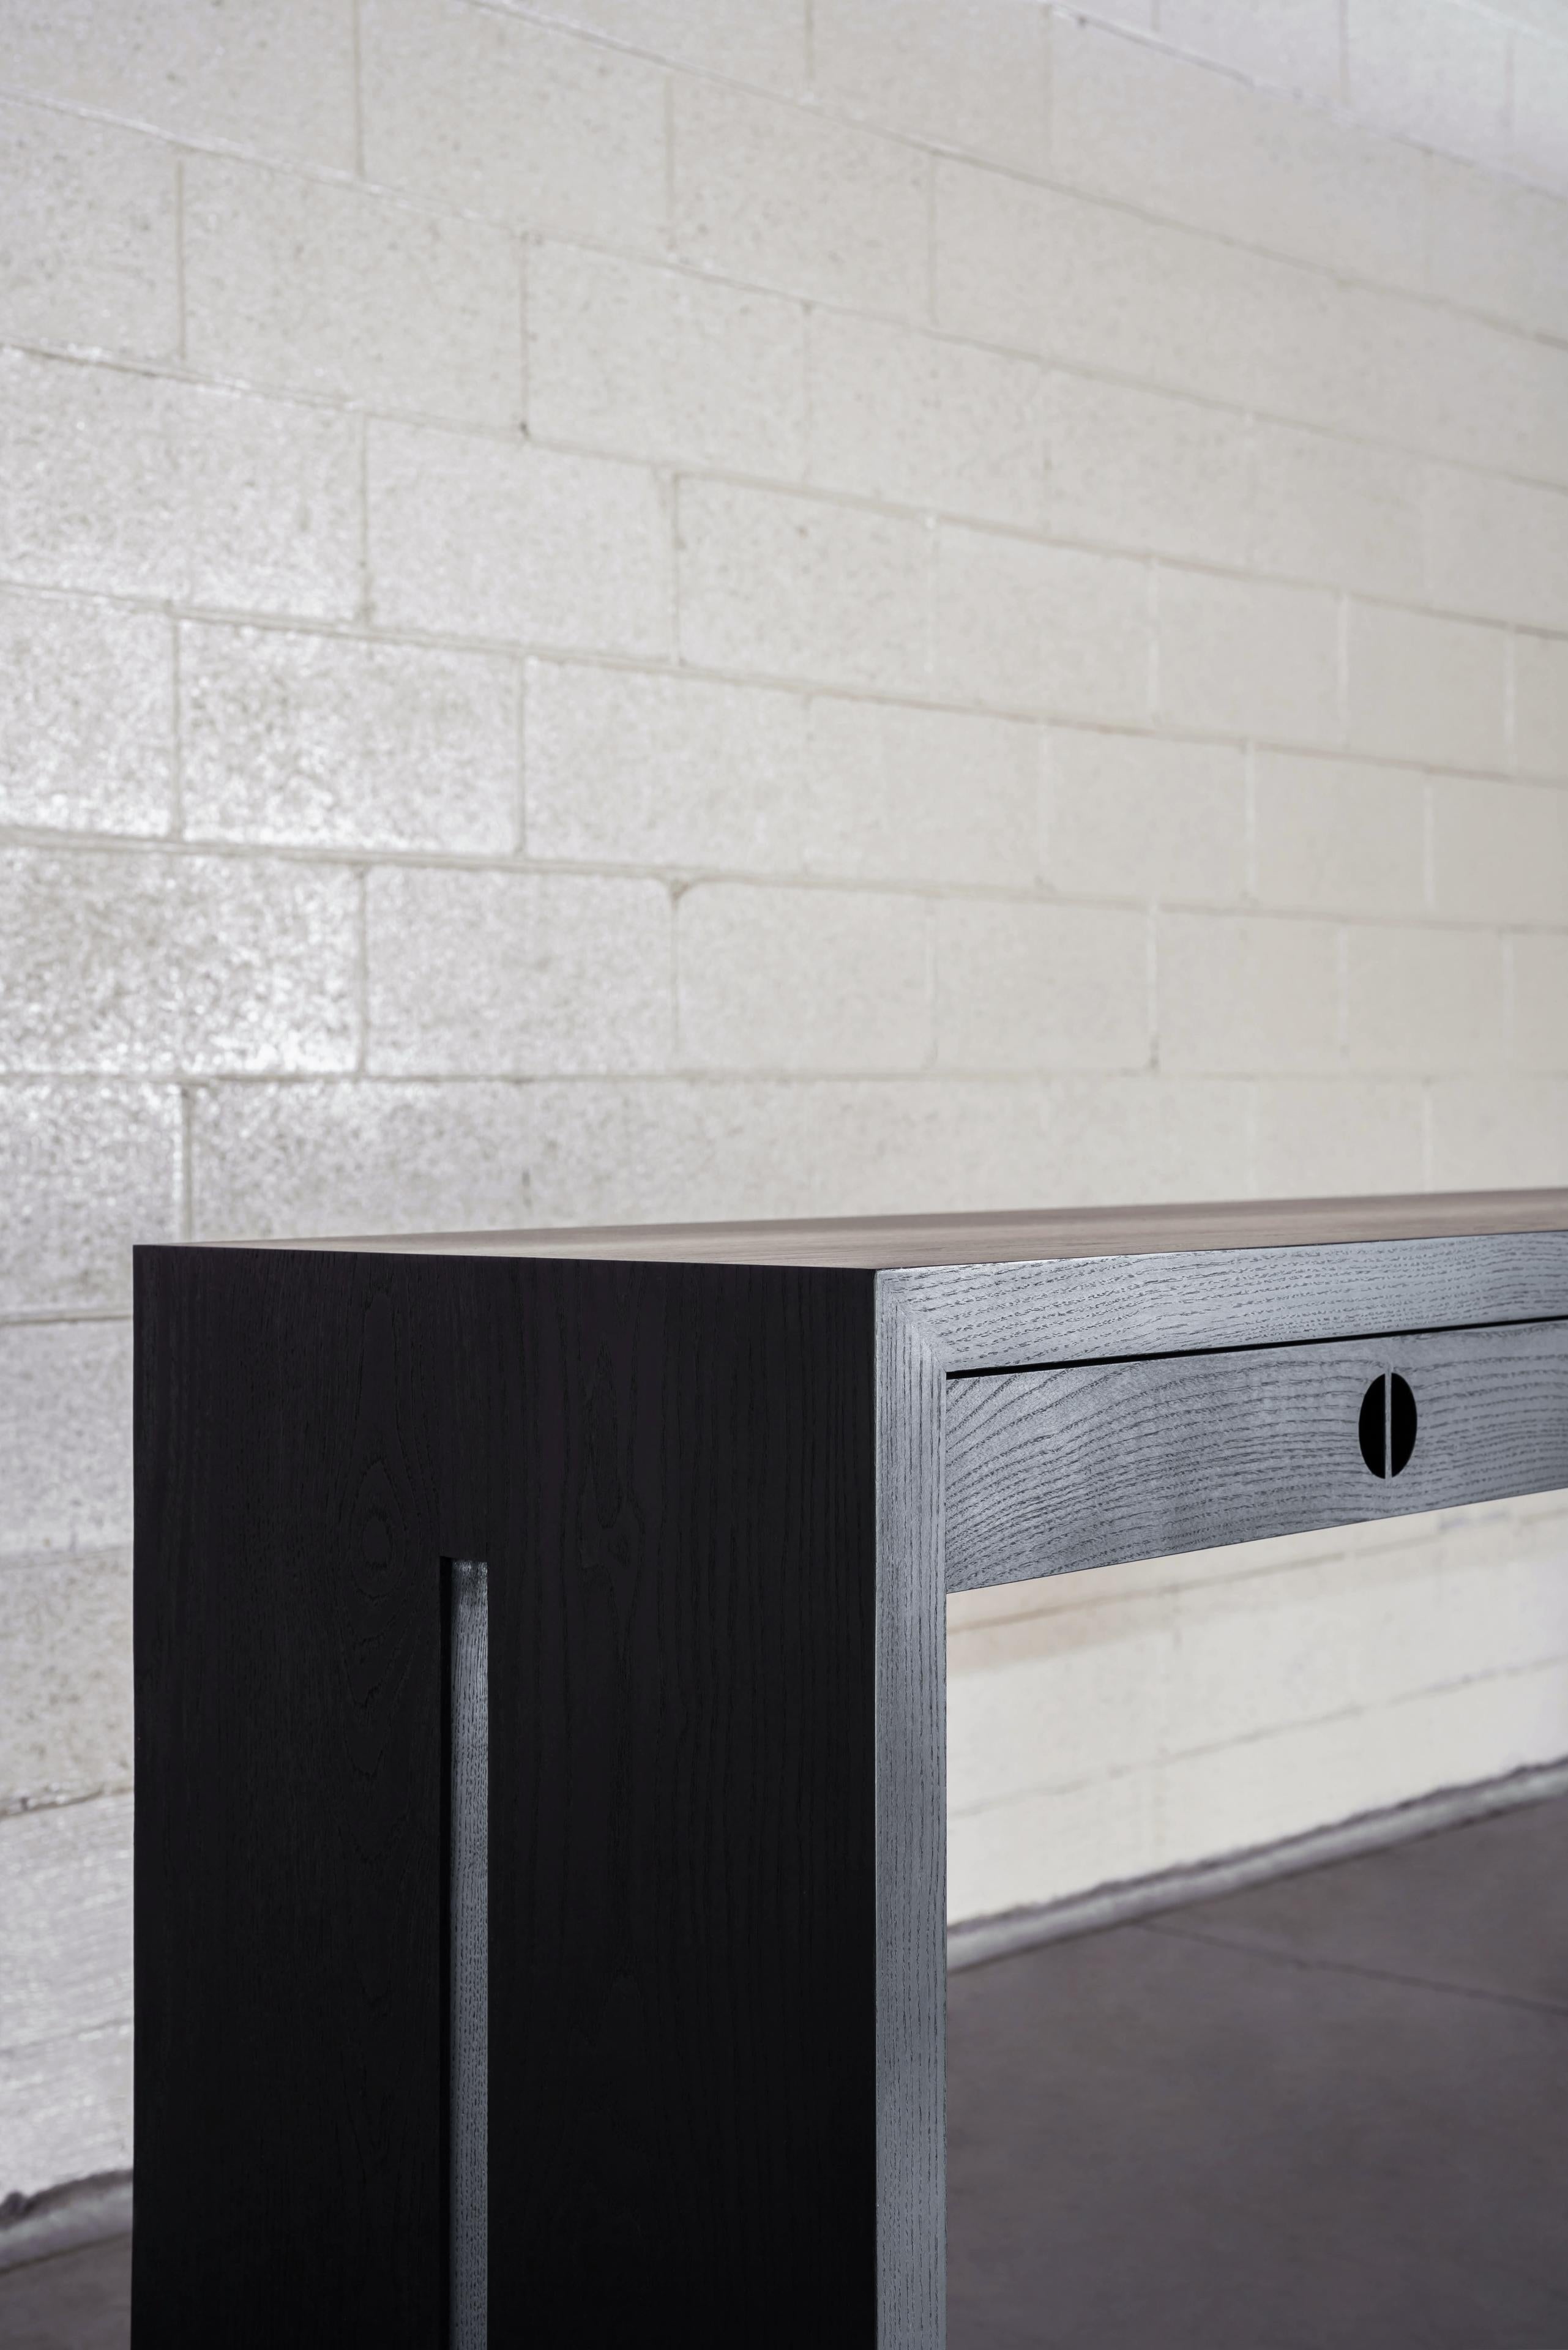 This custom wood console table is hand-made in the United States with all hardwood construction. It features a modern design with a solid ash body and a gorgeous matte black finish. Convenient and accessible storage drawers feature integrated